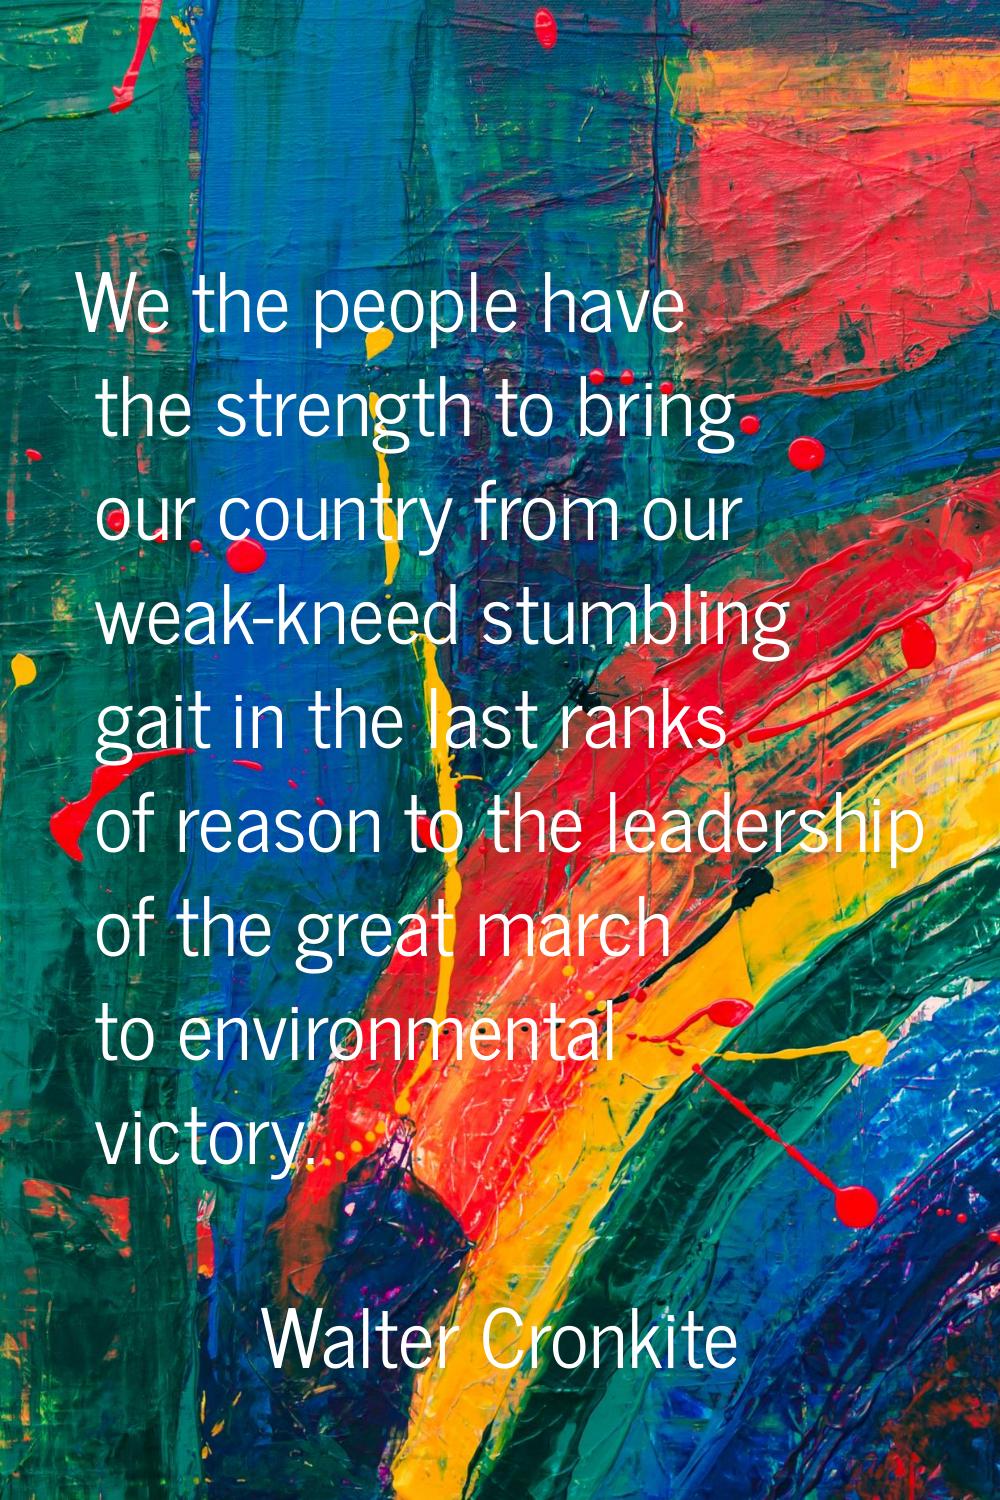 We the people have the strength to bring our country from our weak-kneed stumbling gait in the last